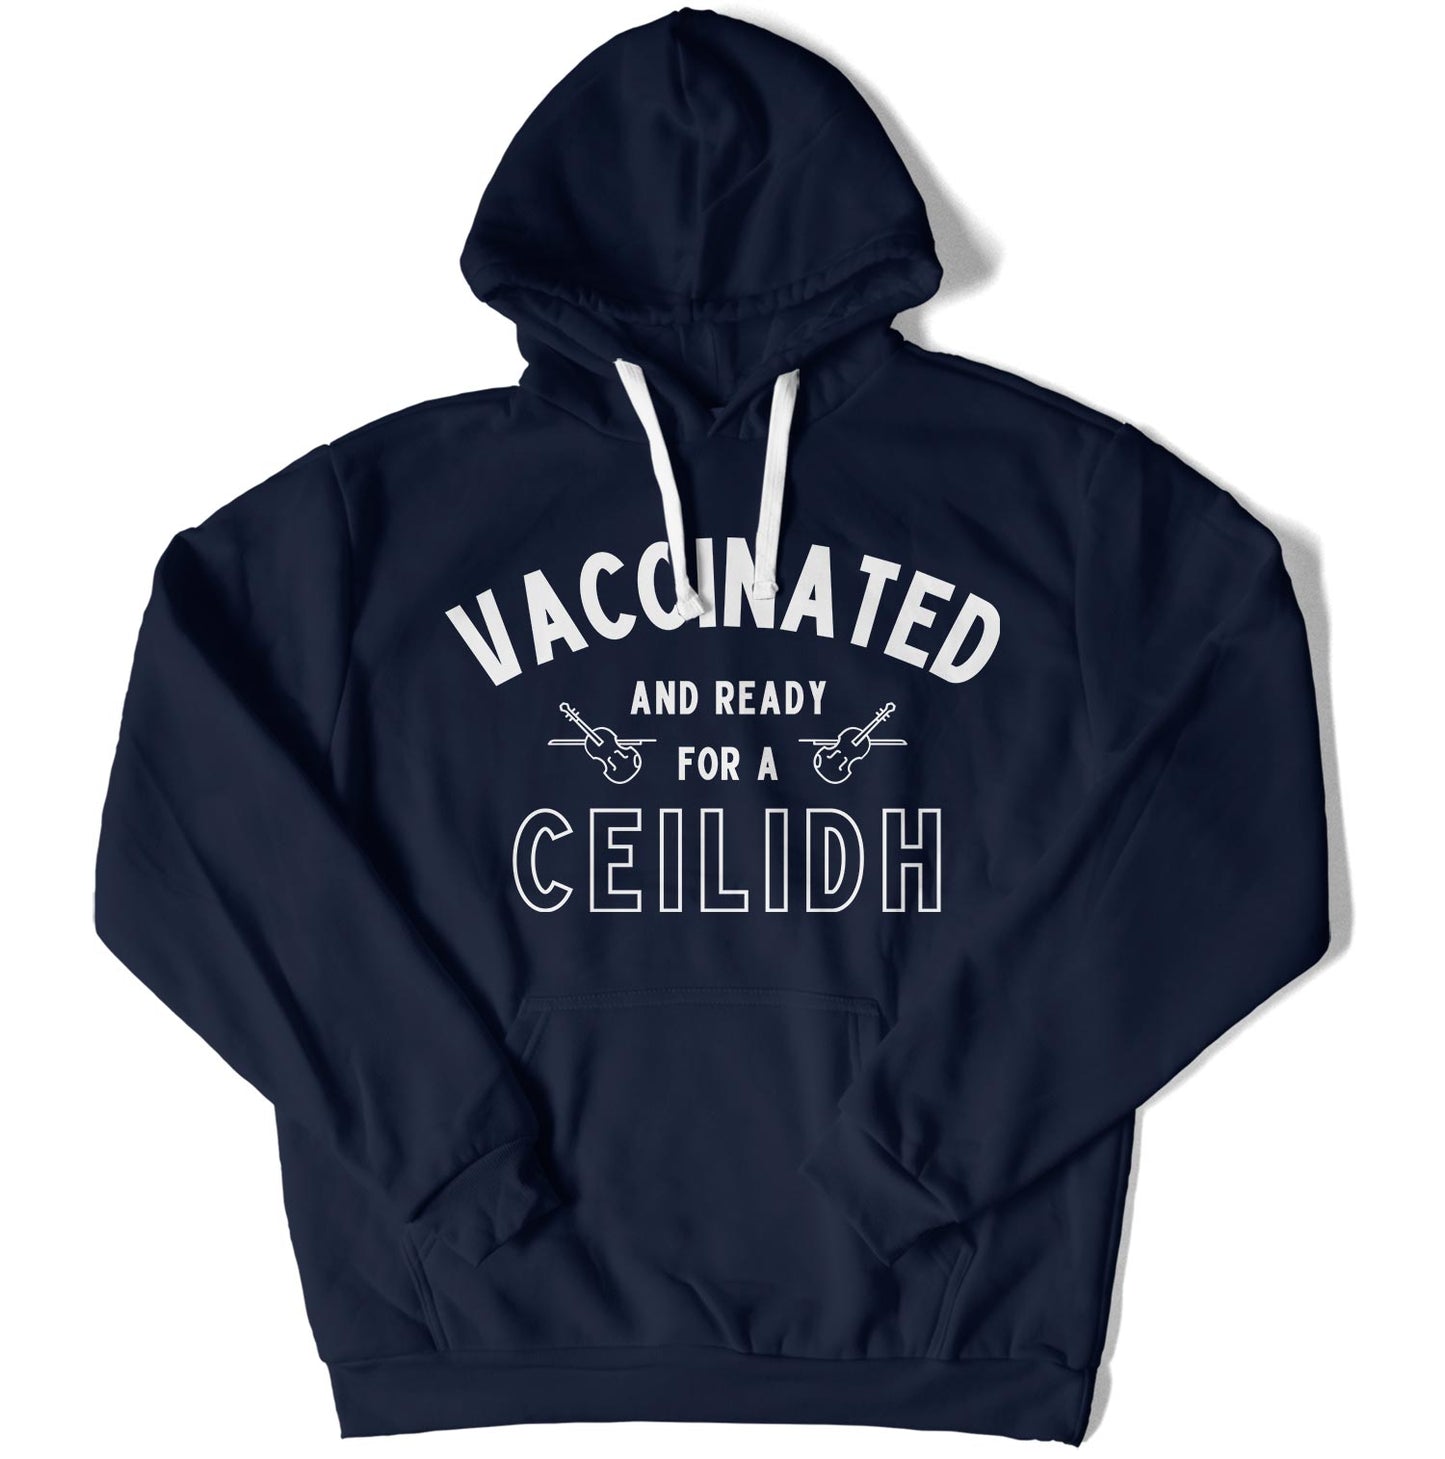 Vaccinated and Ready for a Ceilidh Unisex Hoodie-East Coast AF Apparel